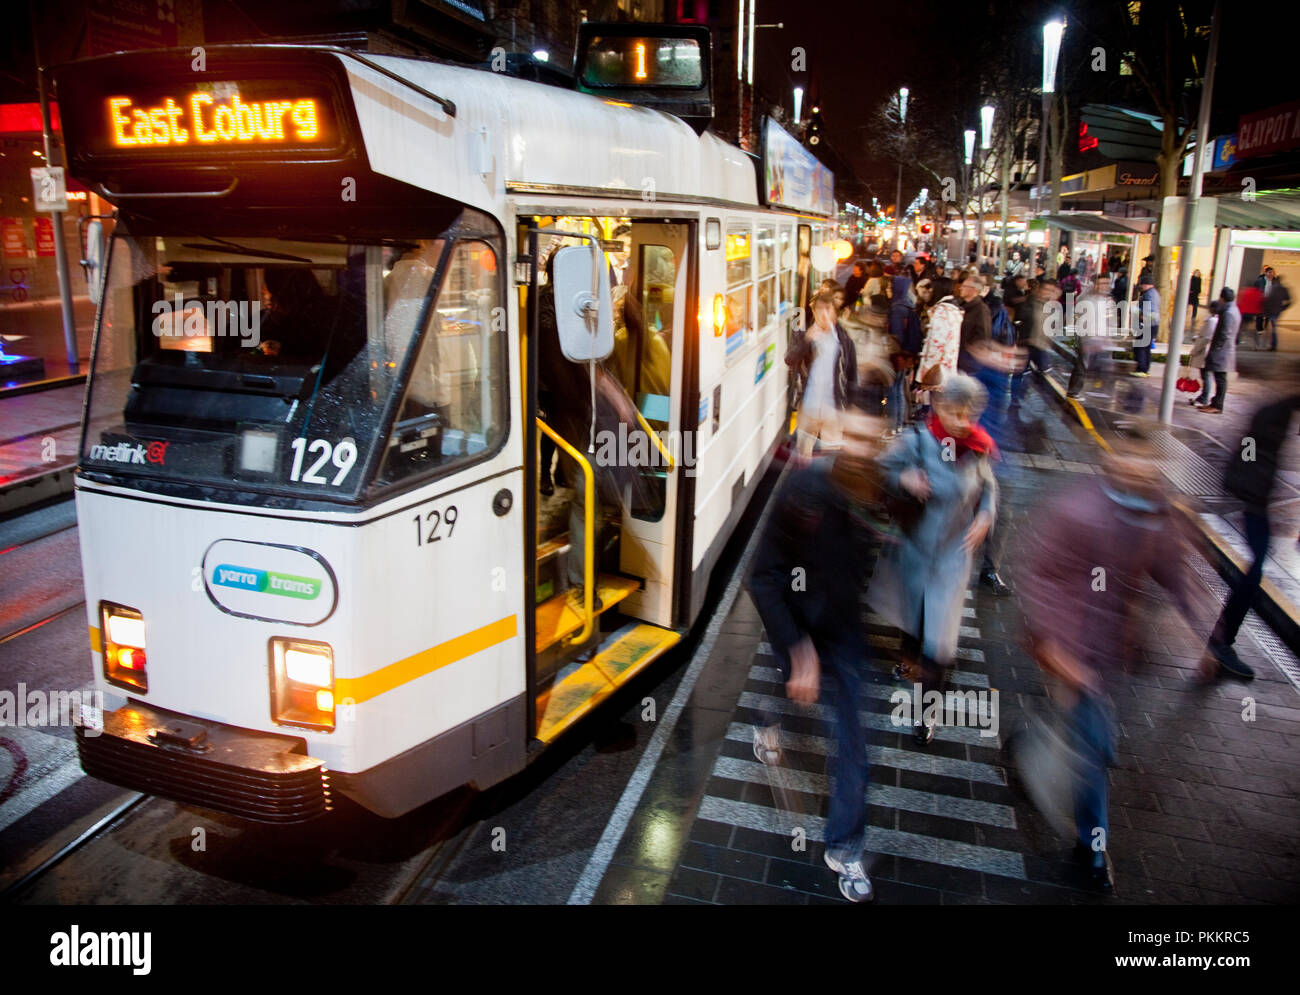 The northbound East Coburg tram stopped on Swanston Street in Melbourne's CBD. Stock Photo